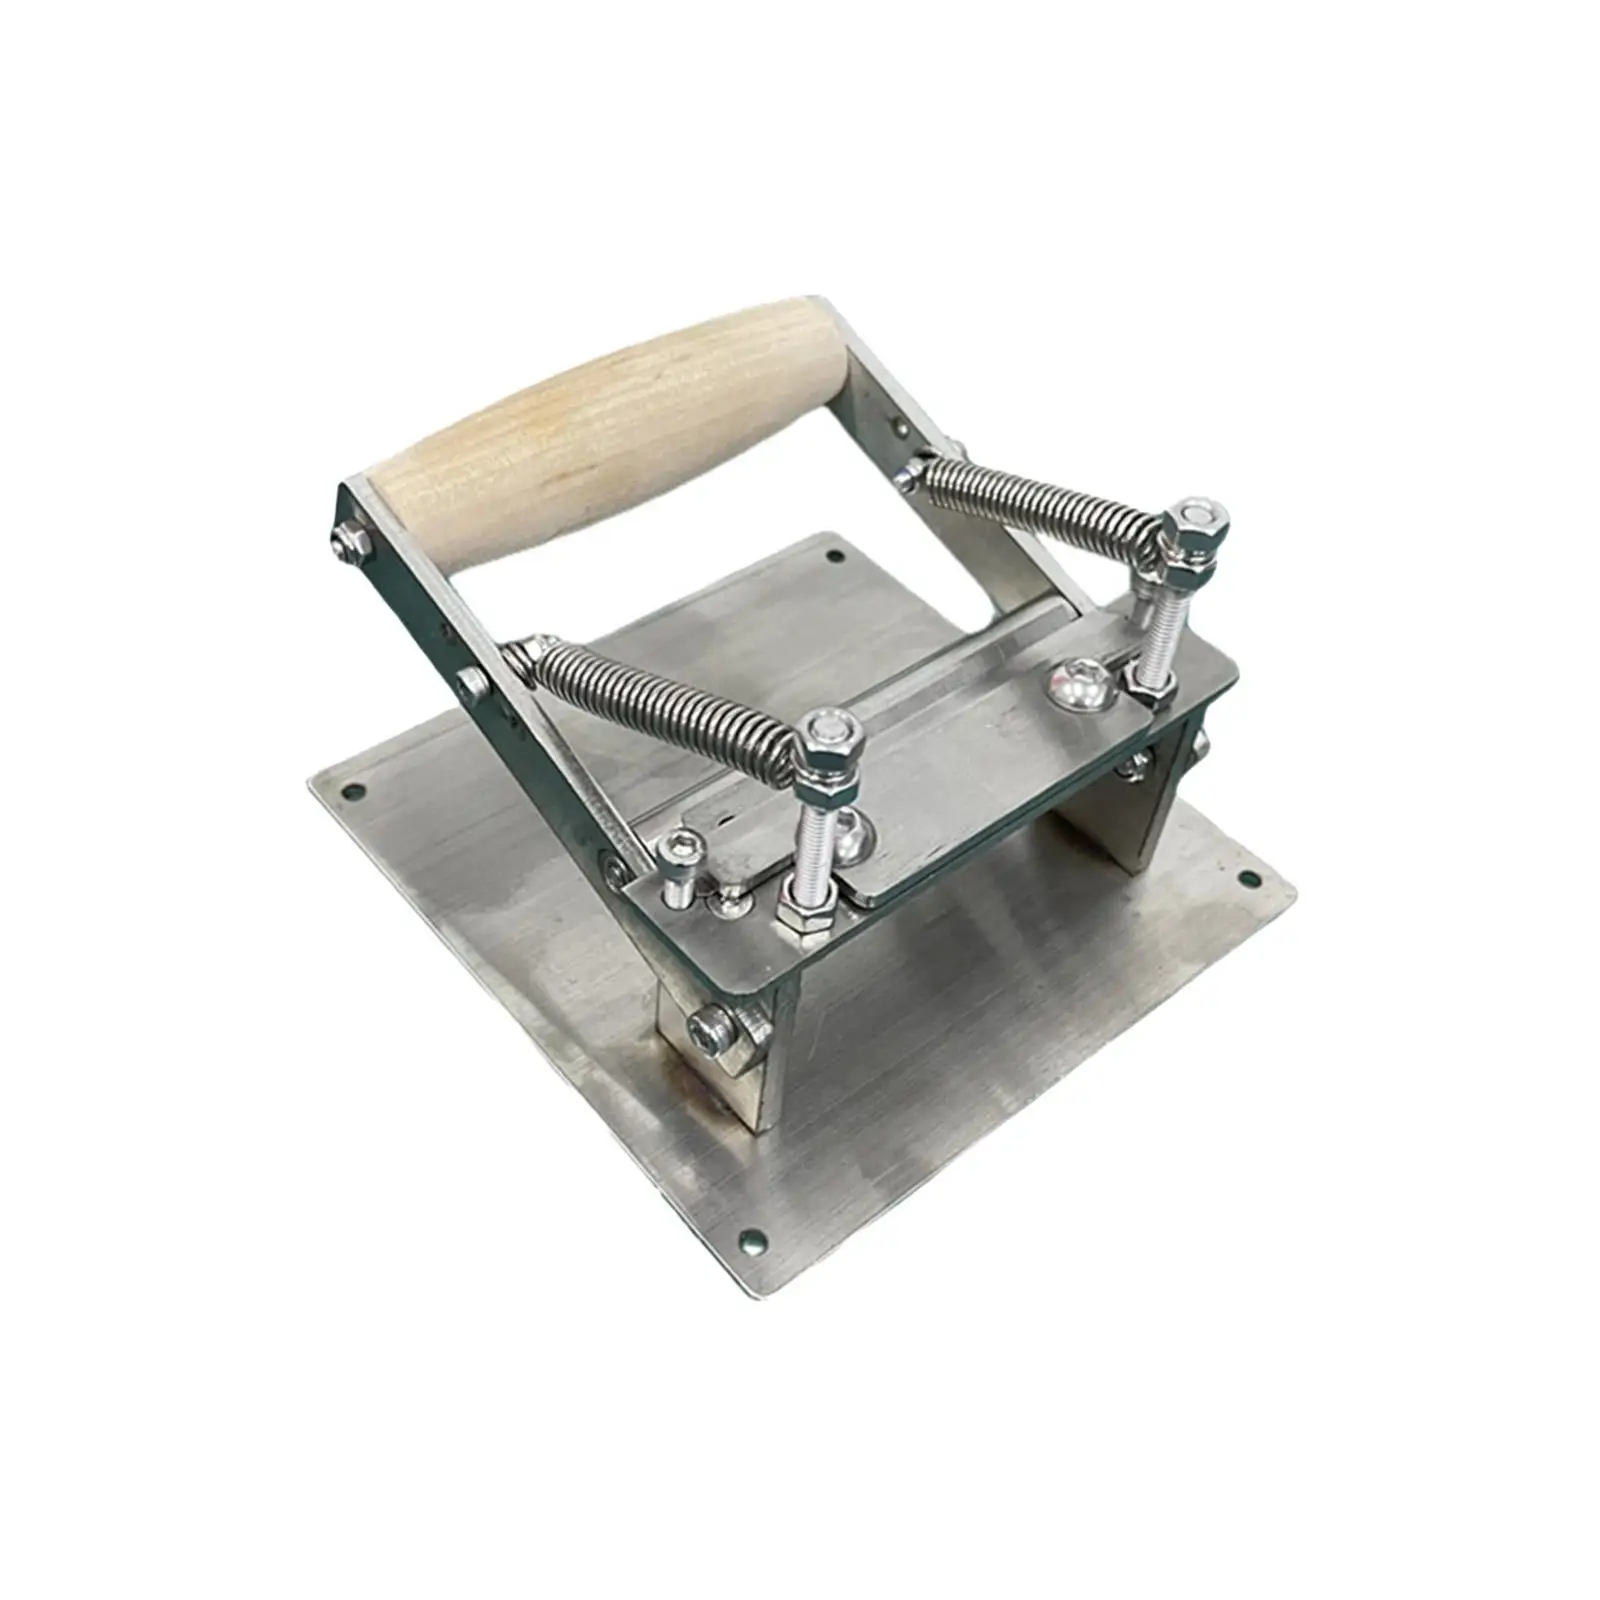 Leather Shoveling Peeling Machine Stainless Steel Leathercraft Peeling Machine Leather Thinning Machine for Tanned Leather